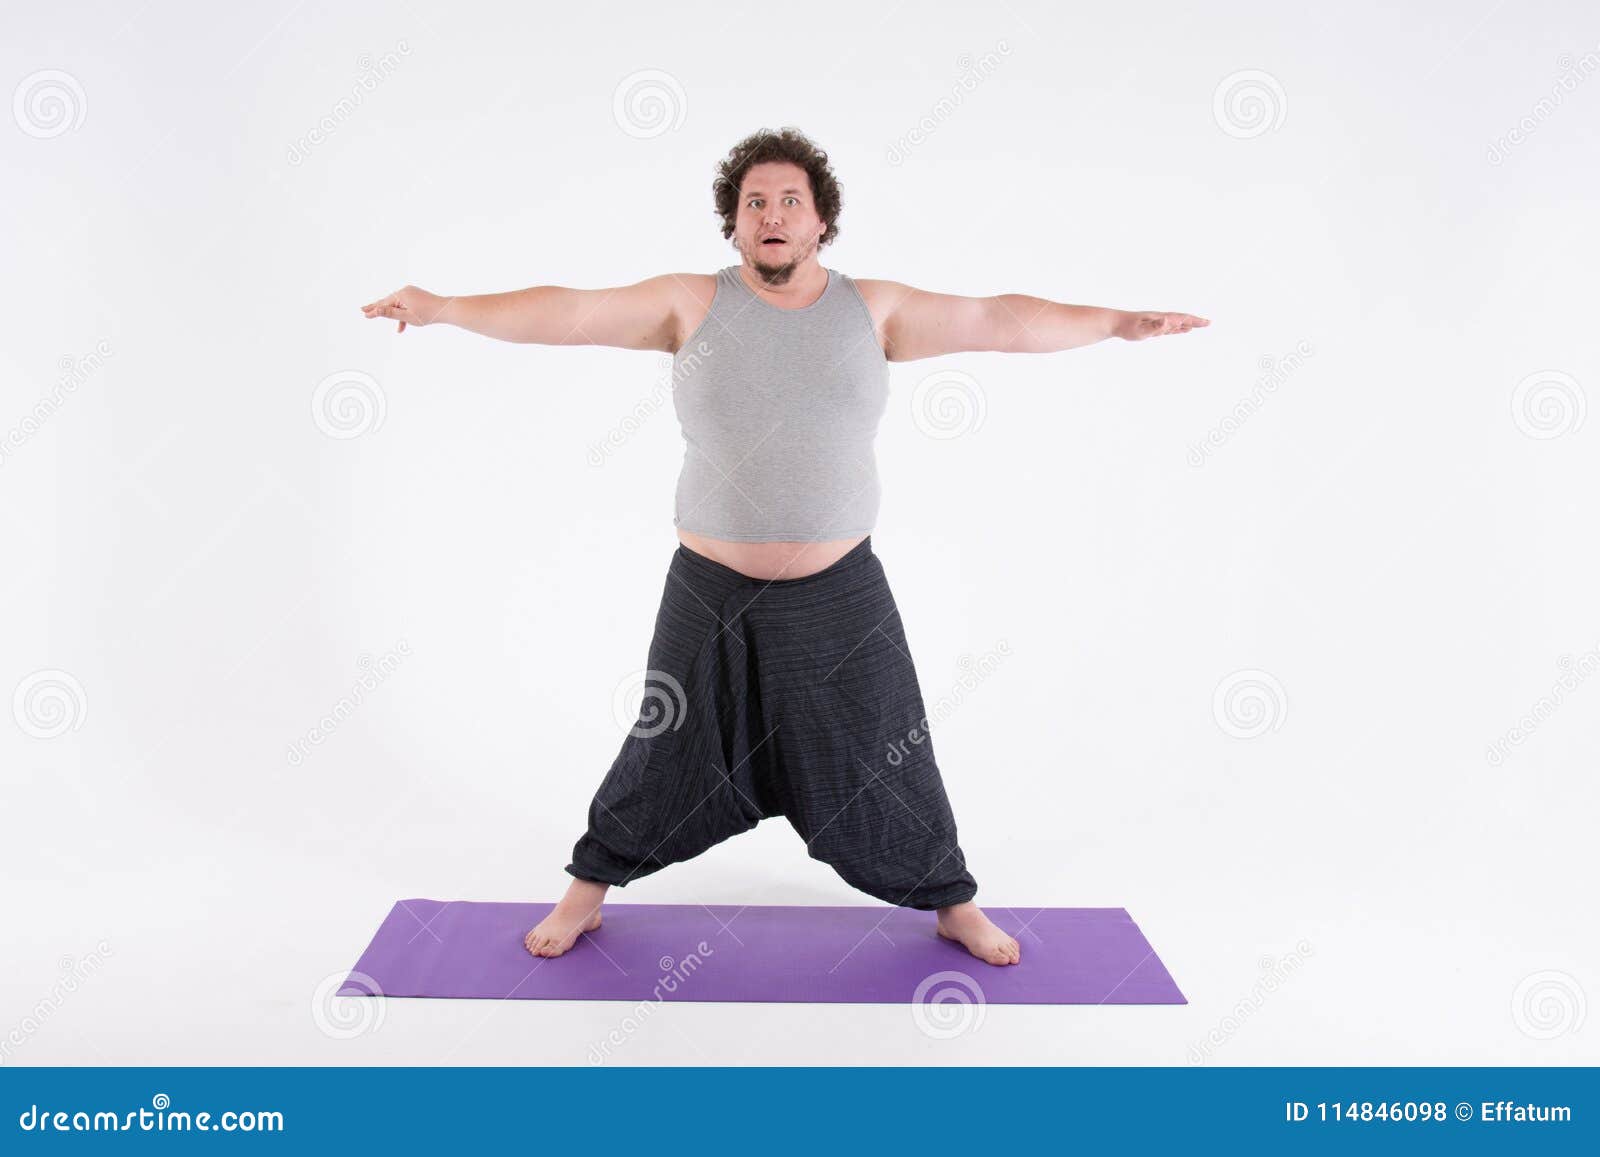 Funny Fat Man and Yoga. Sport, Diet and a Healthy Lifestyle. Stock ...